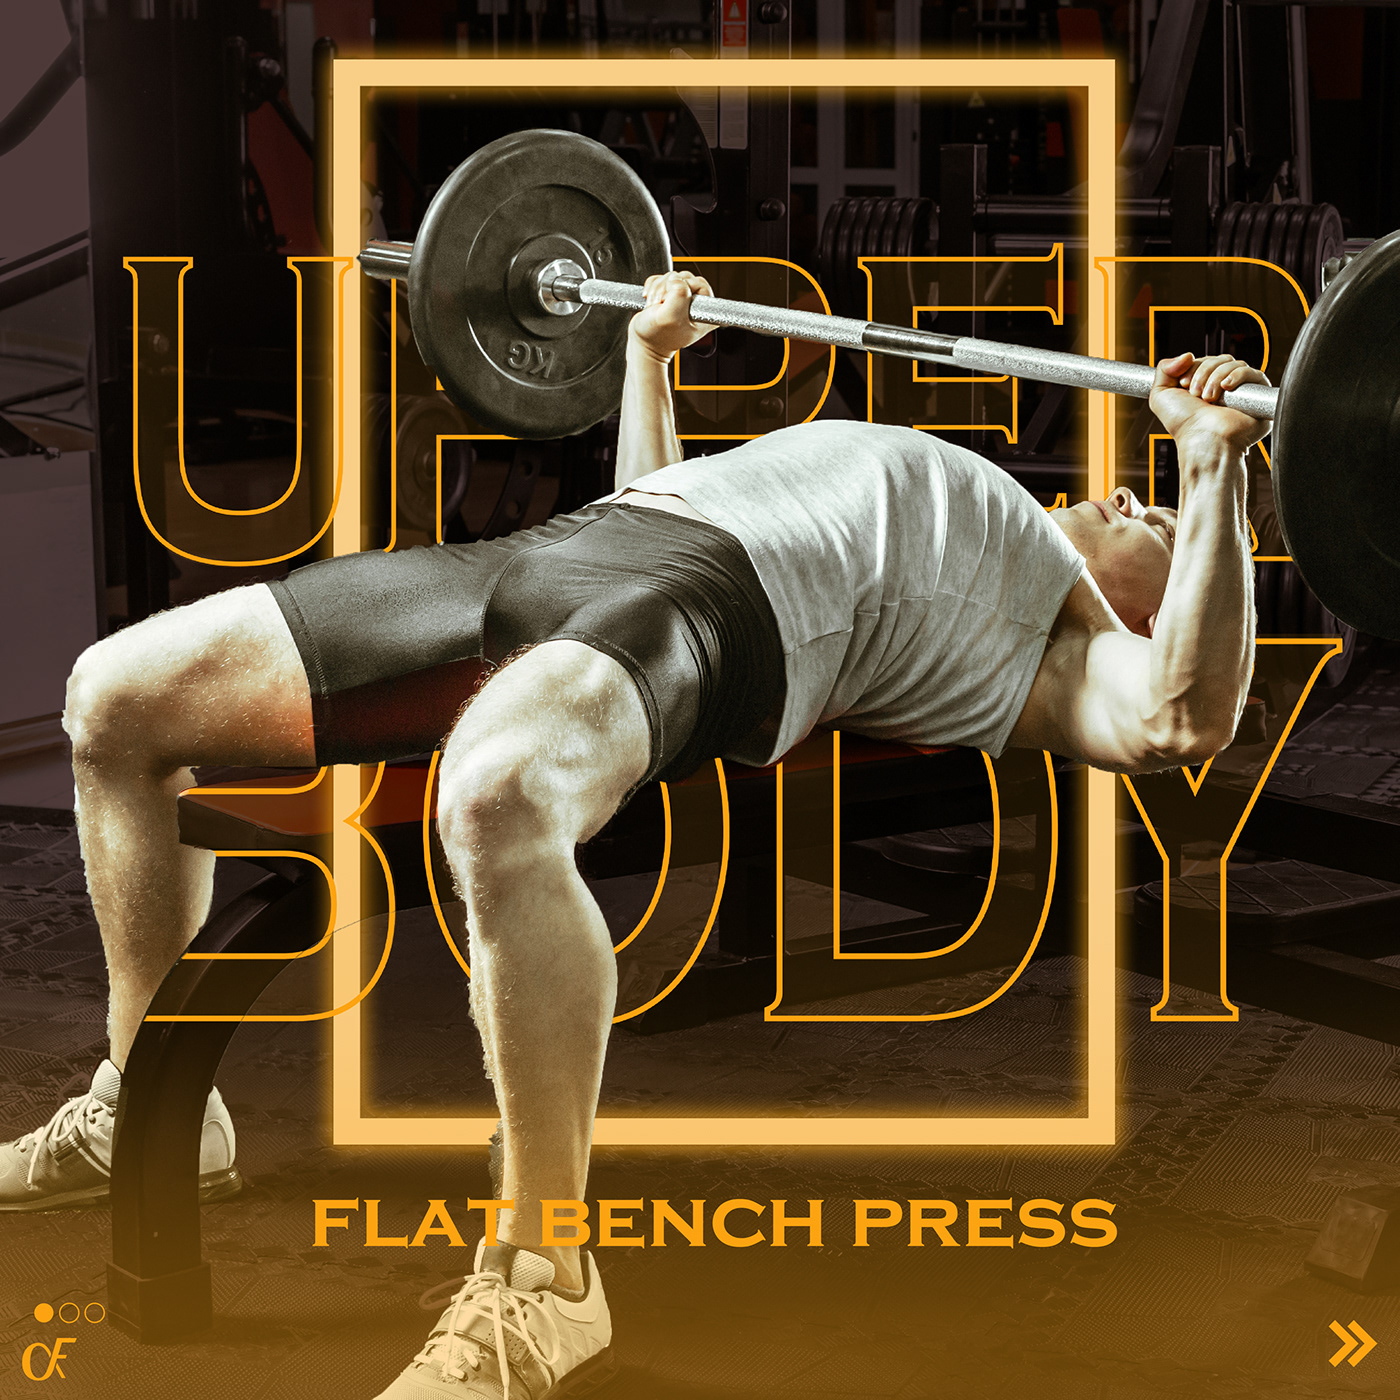 FIT muscle fitness gym homeworkout upperbody